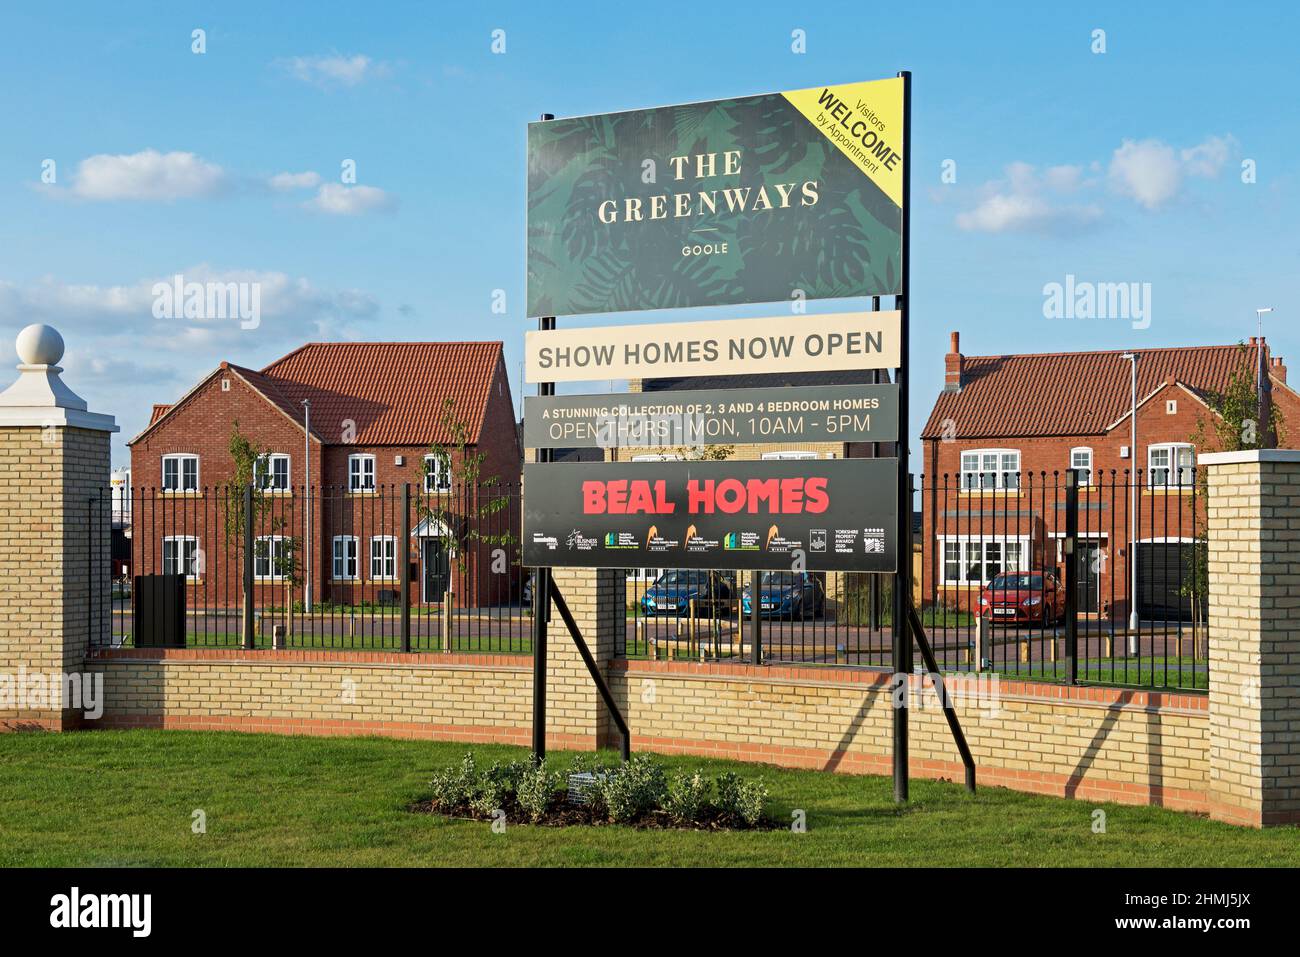 Greenways, a new housing development by Beal Homes, on Rawcliffe Road, Goole, East Yorkshire, England UK Stock Photo